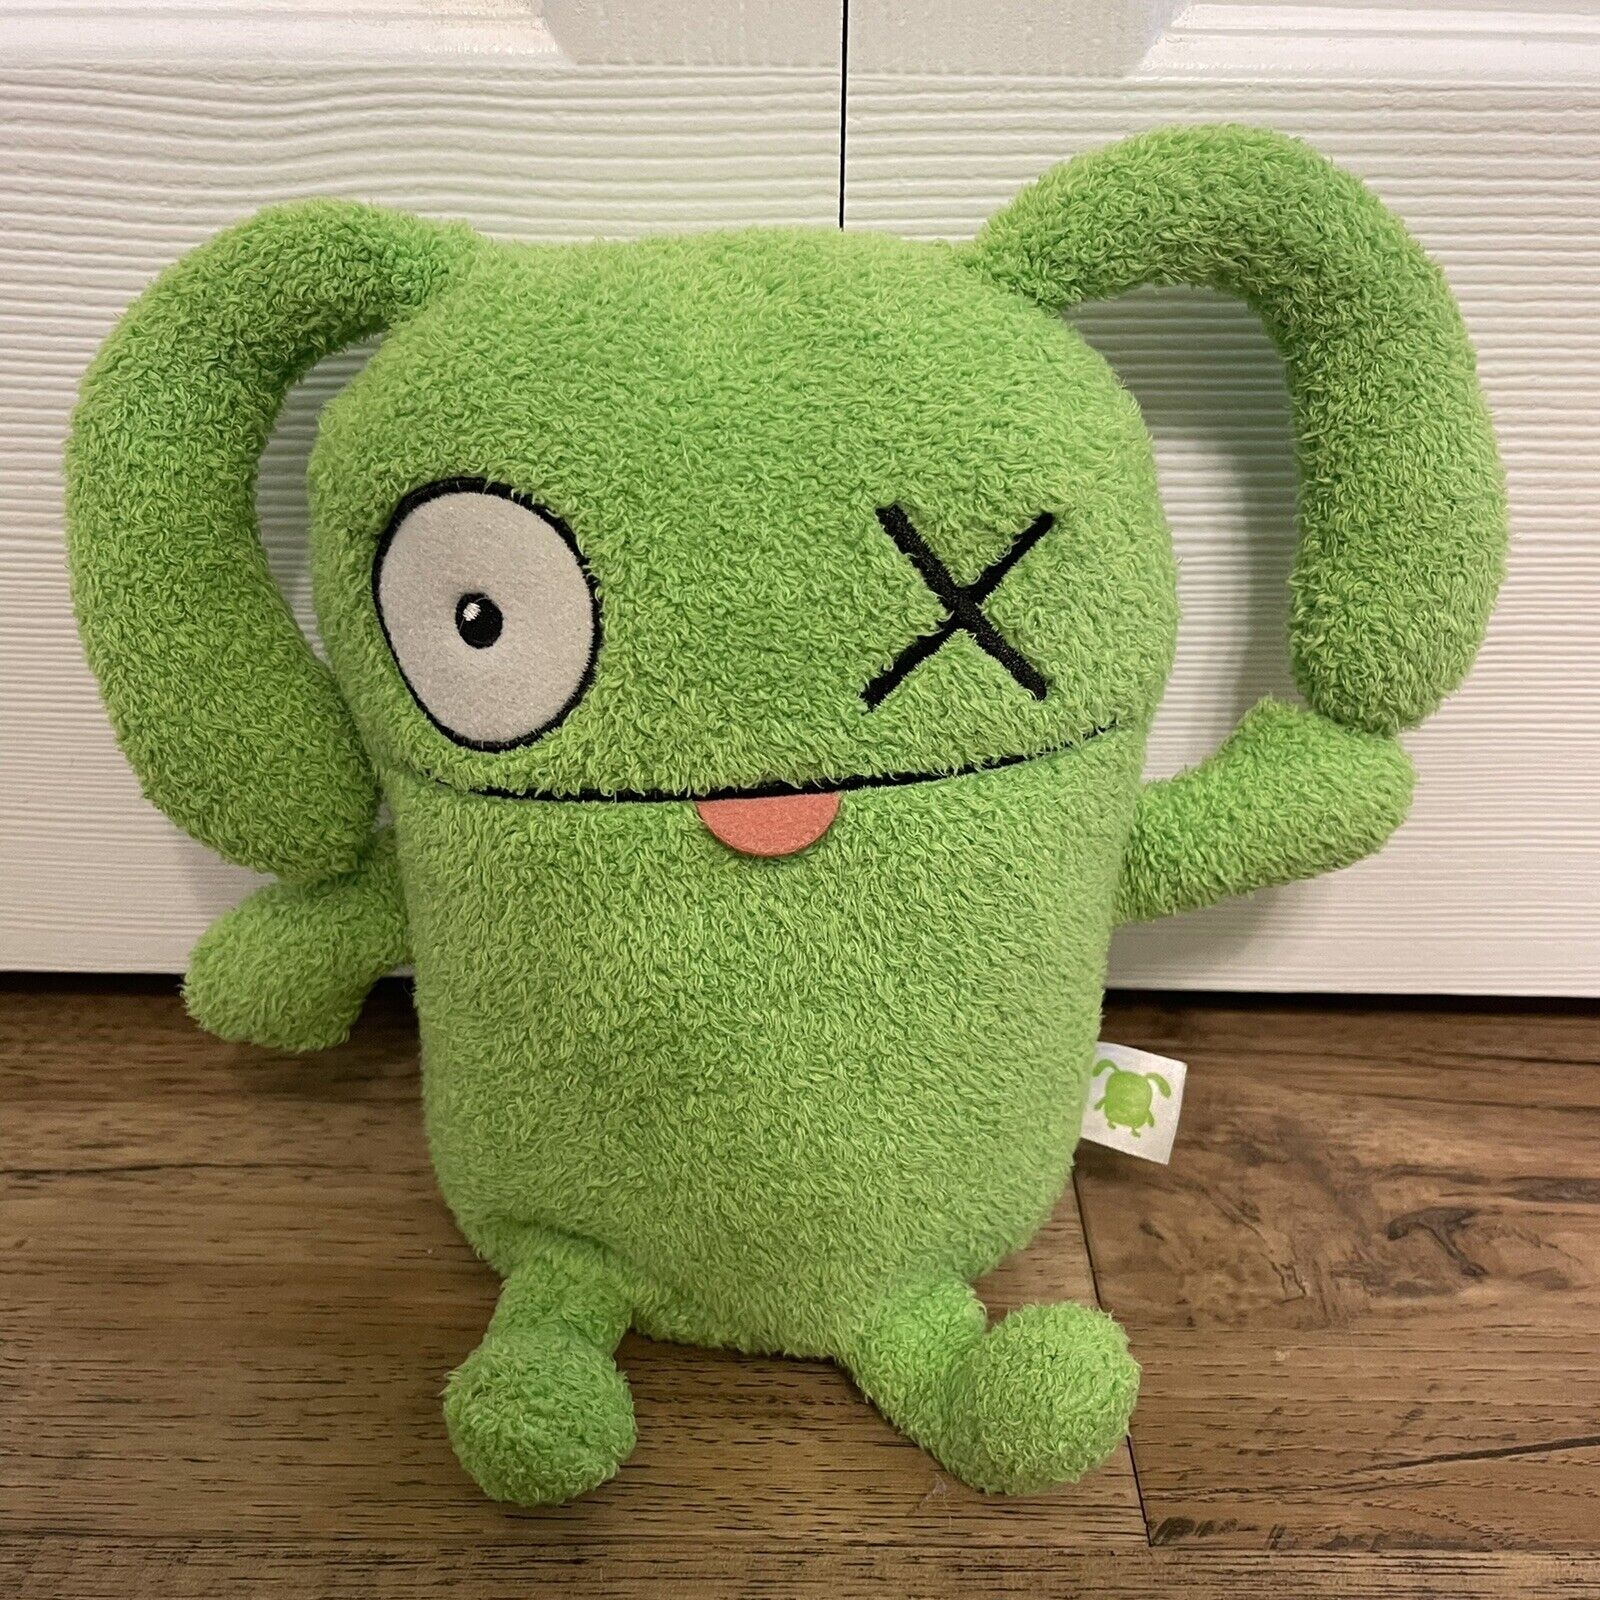 Ugly Doll Ox 8” Green Plush Monster